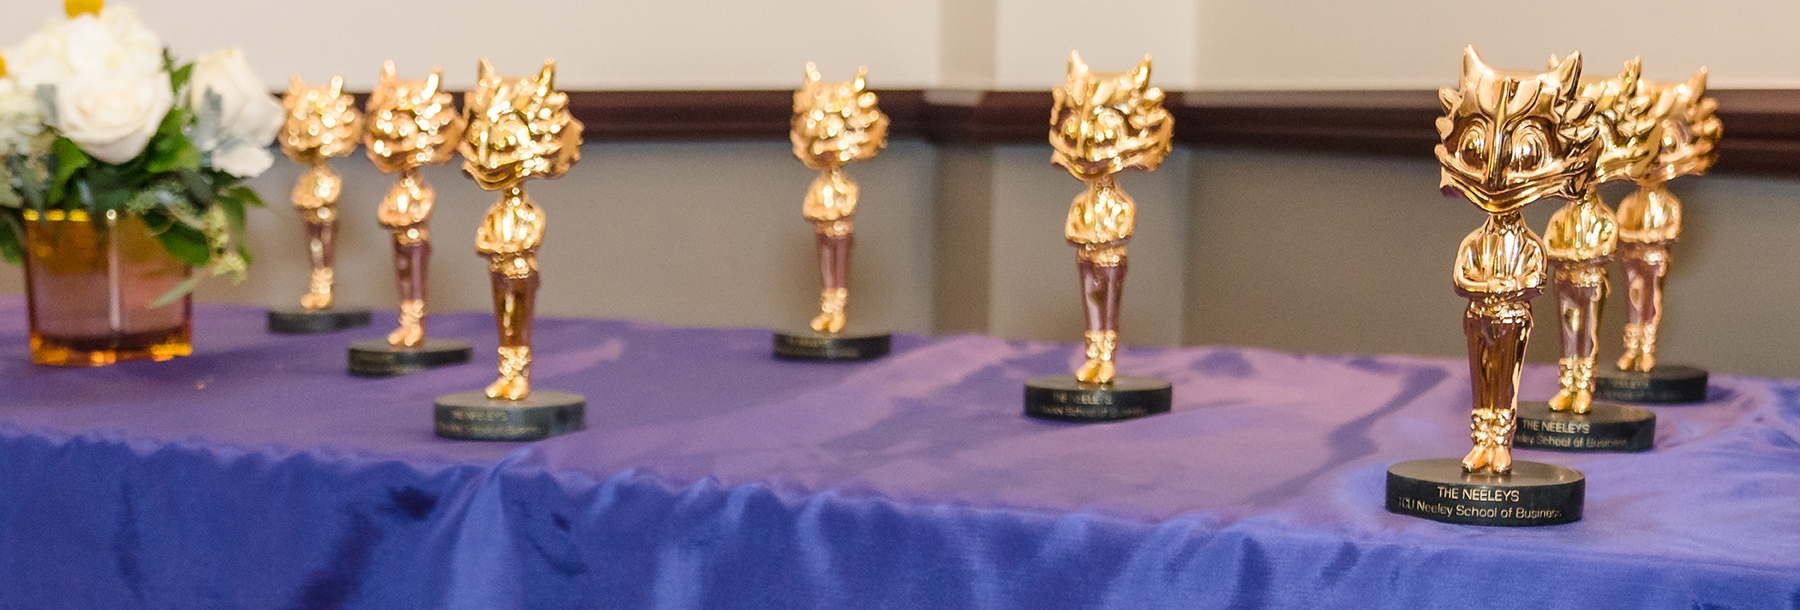 Section Image: Neeley Award statues of Superfrog 